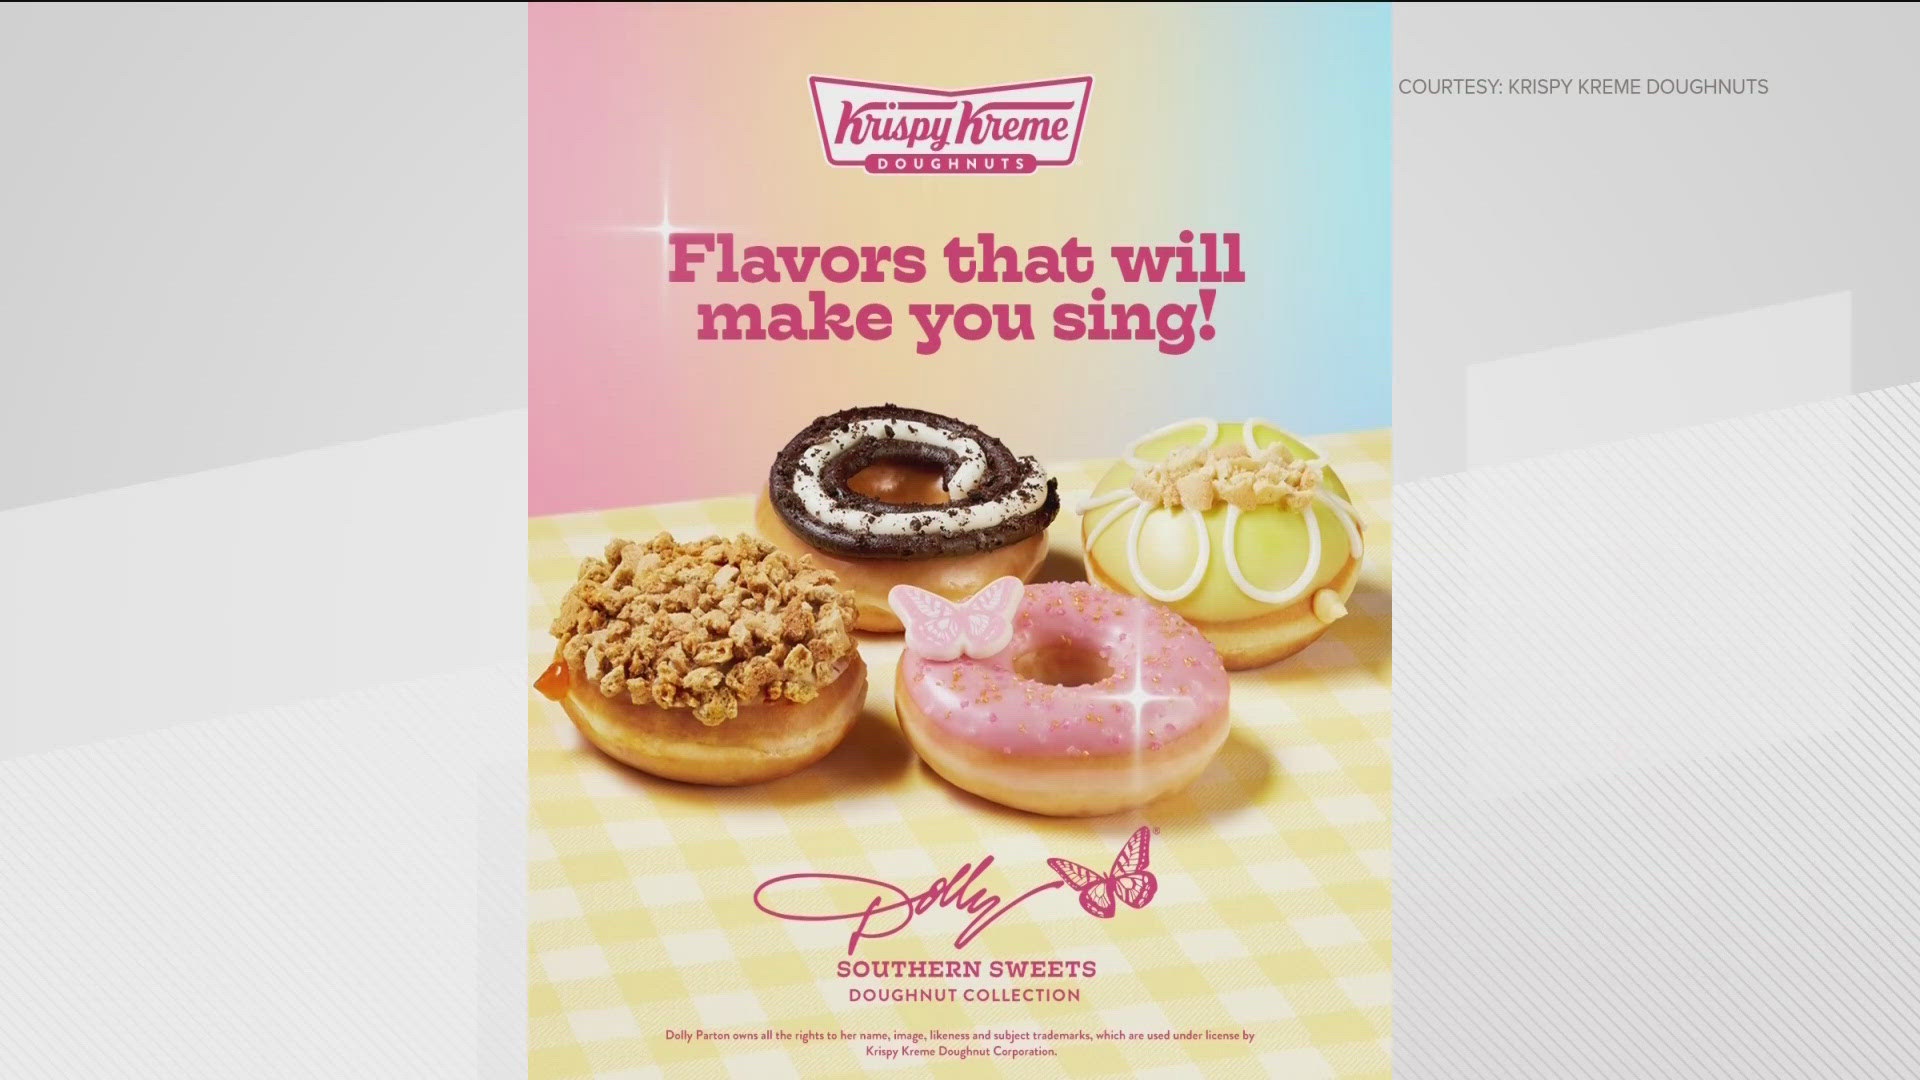 Dolly Parton unveiled four new doughnut flavors: Dolly Dazzler, Peachy Keen Cobbler, Banana Puddin' and Chocolate Creme Pie.